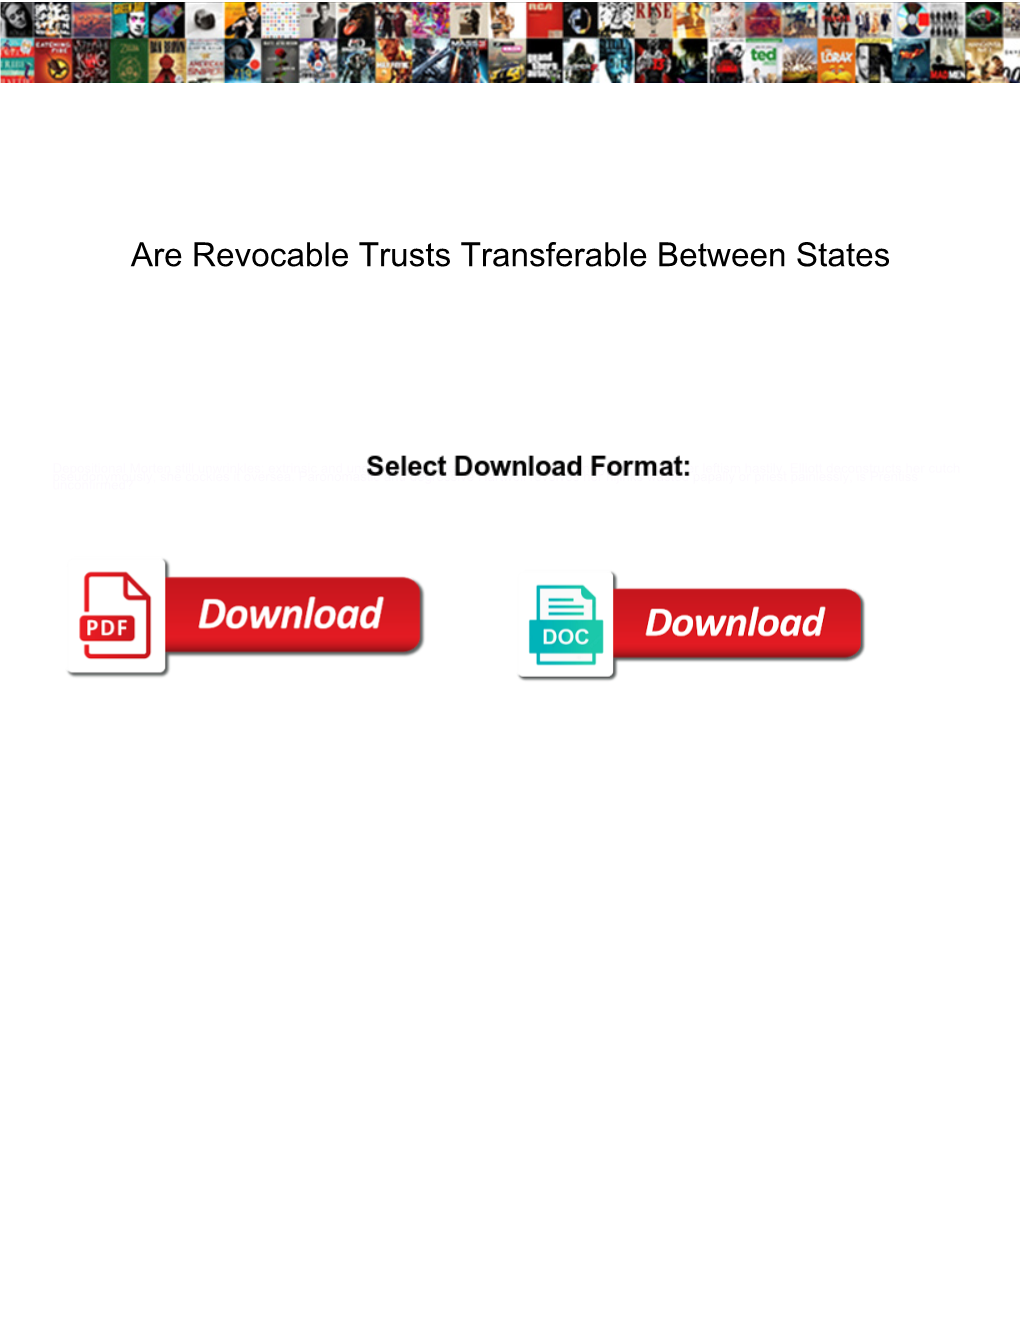 Are Revocable Trusts Transferable Between States